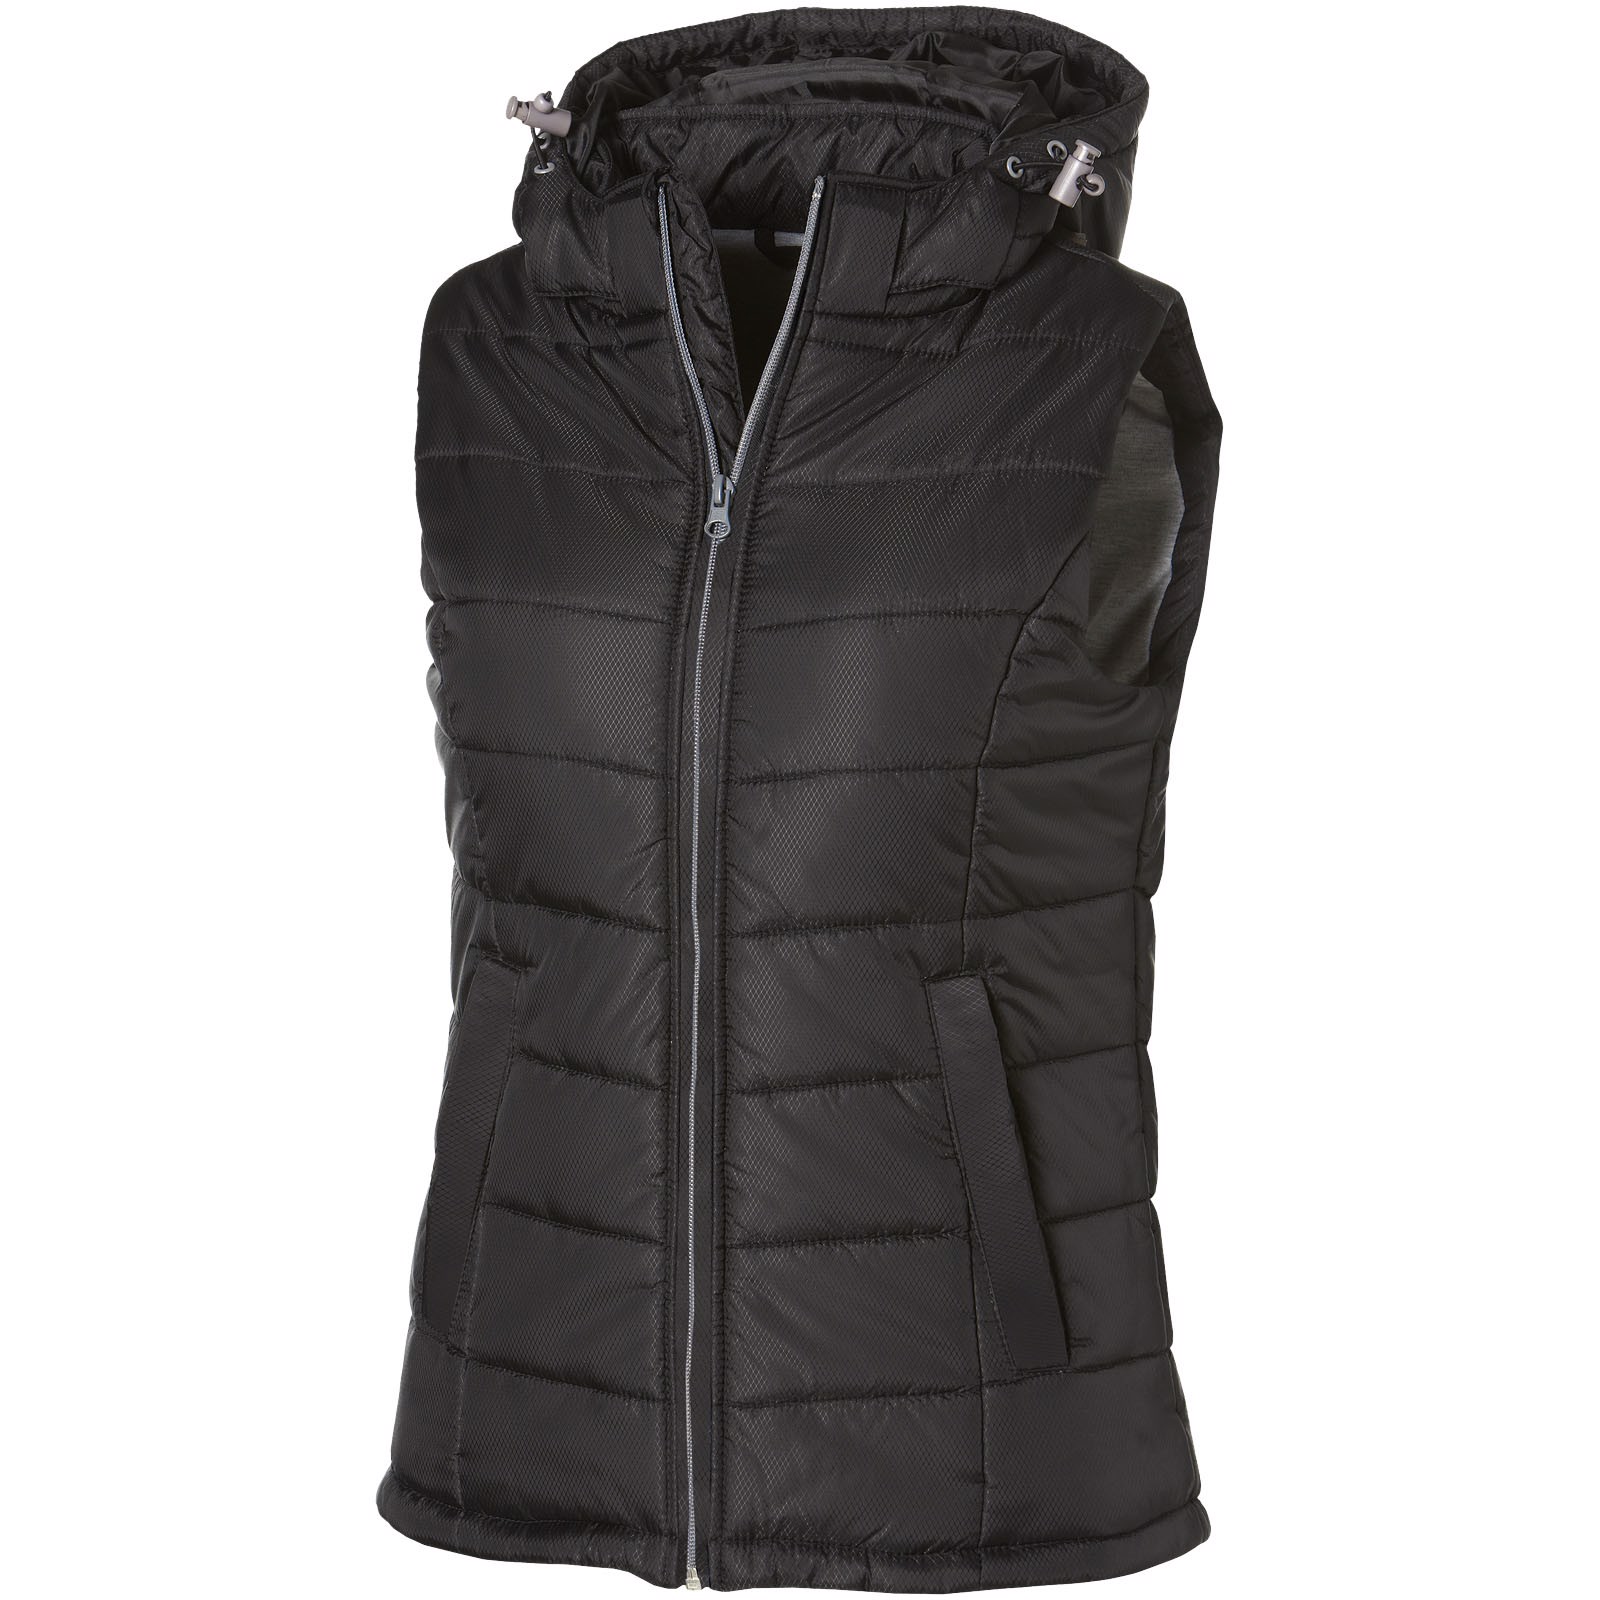 Mixed Doubles ladies bodywarmer - Solid Black / M